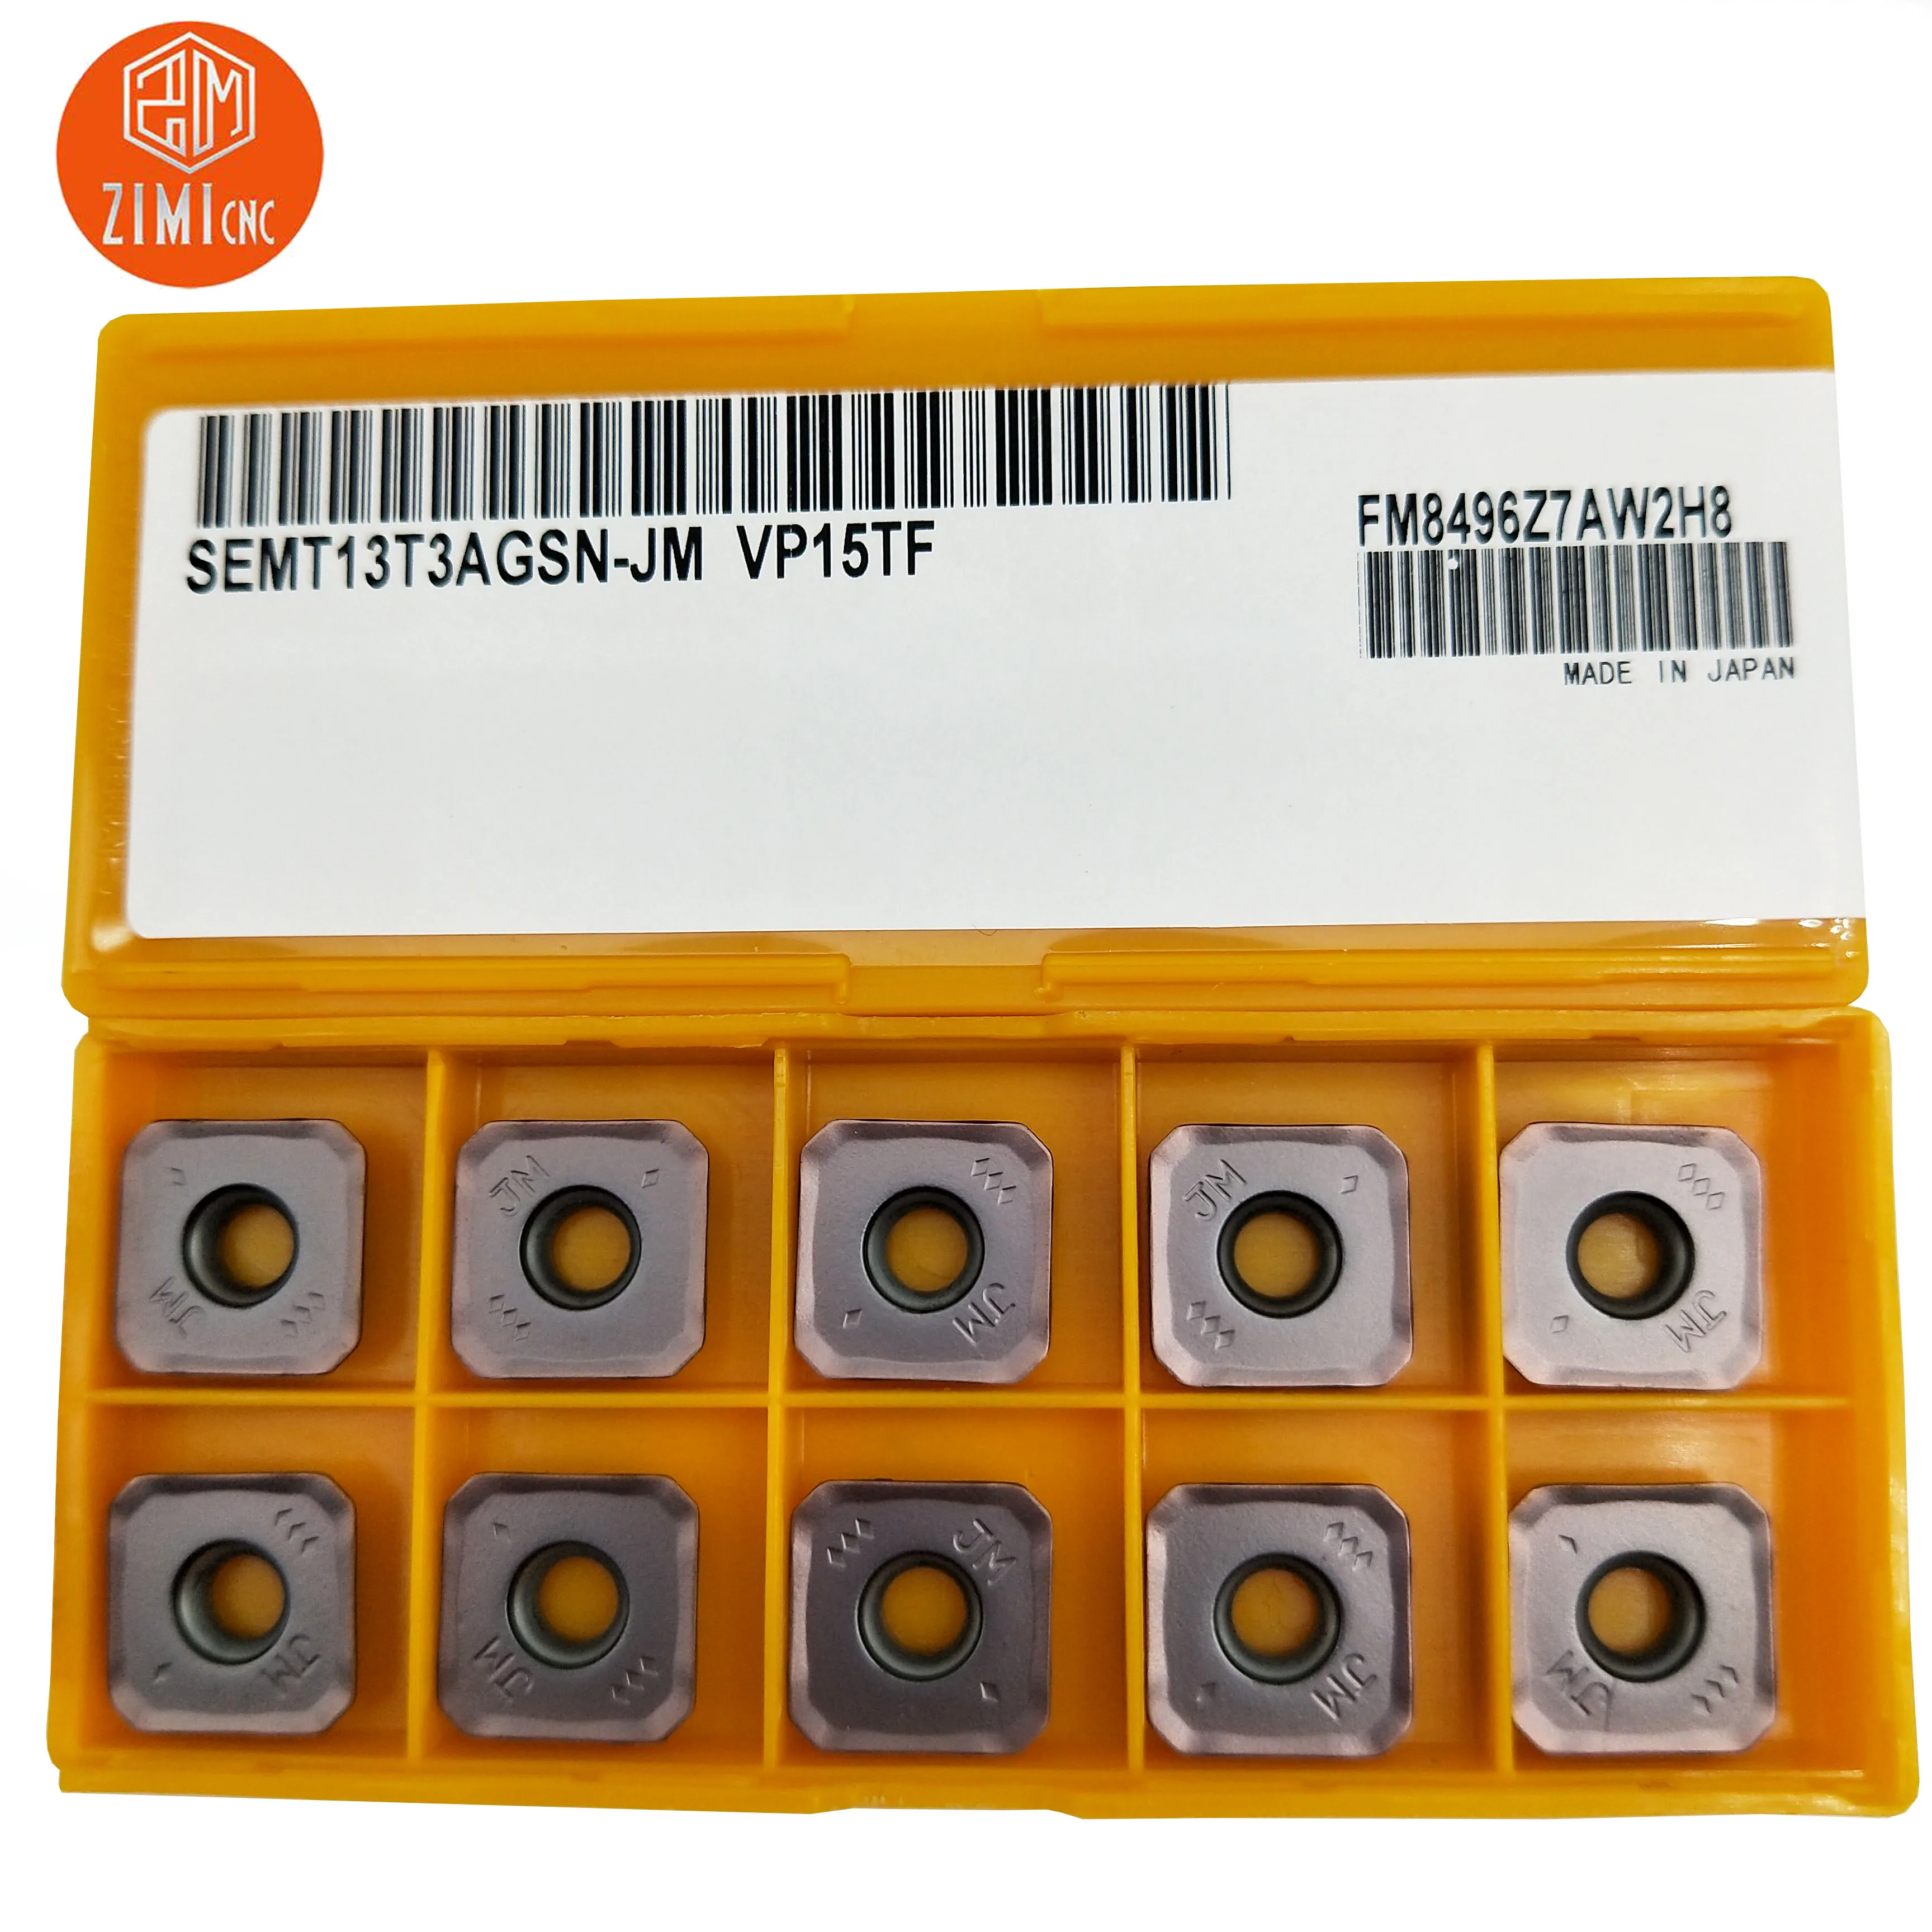 10 pcs SEMT13T3 AGSN-JM VP15TF Carbide Inserts SEMT13T3 Milling Inserts CNC Lathe Blade Cutting Tools for KM13 Milling Inserts four jaw chuck Machine Tools & Accessories